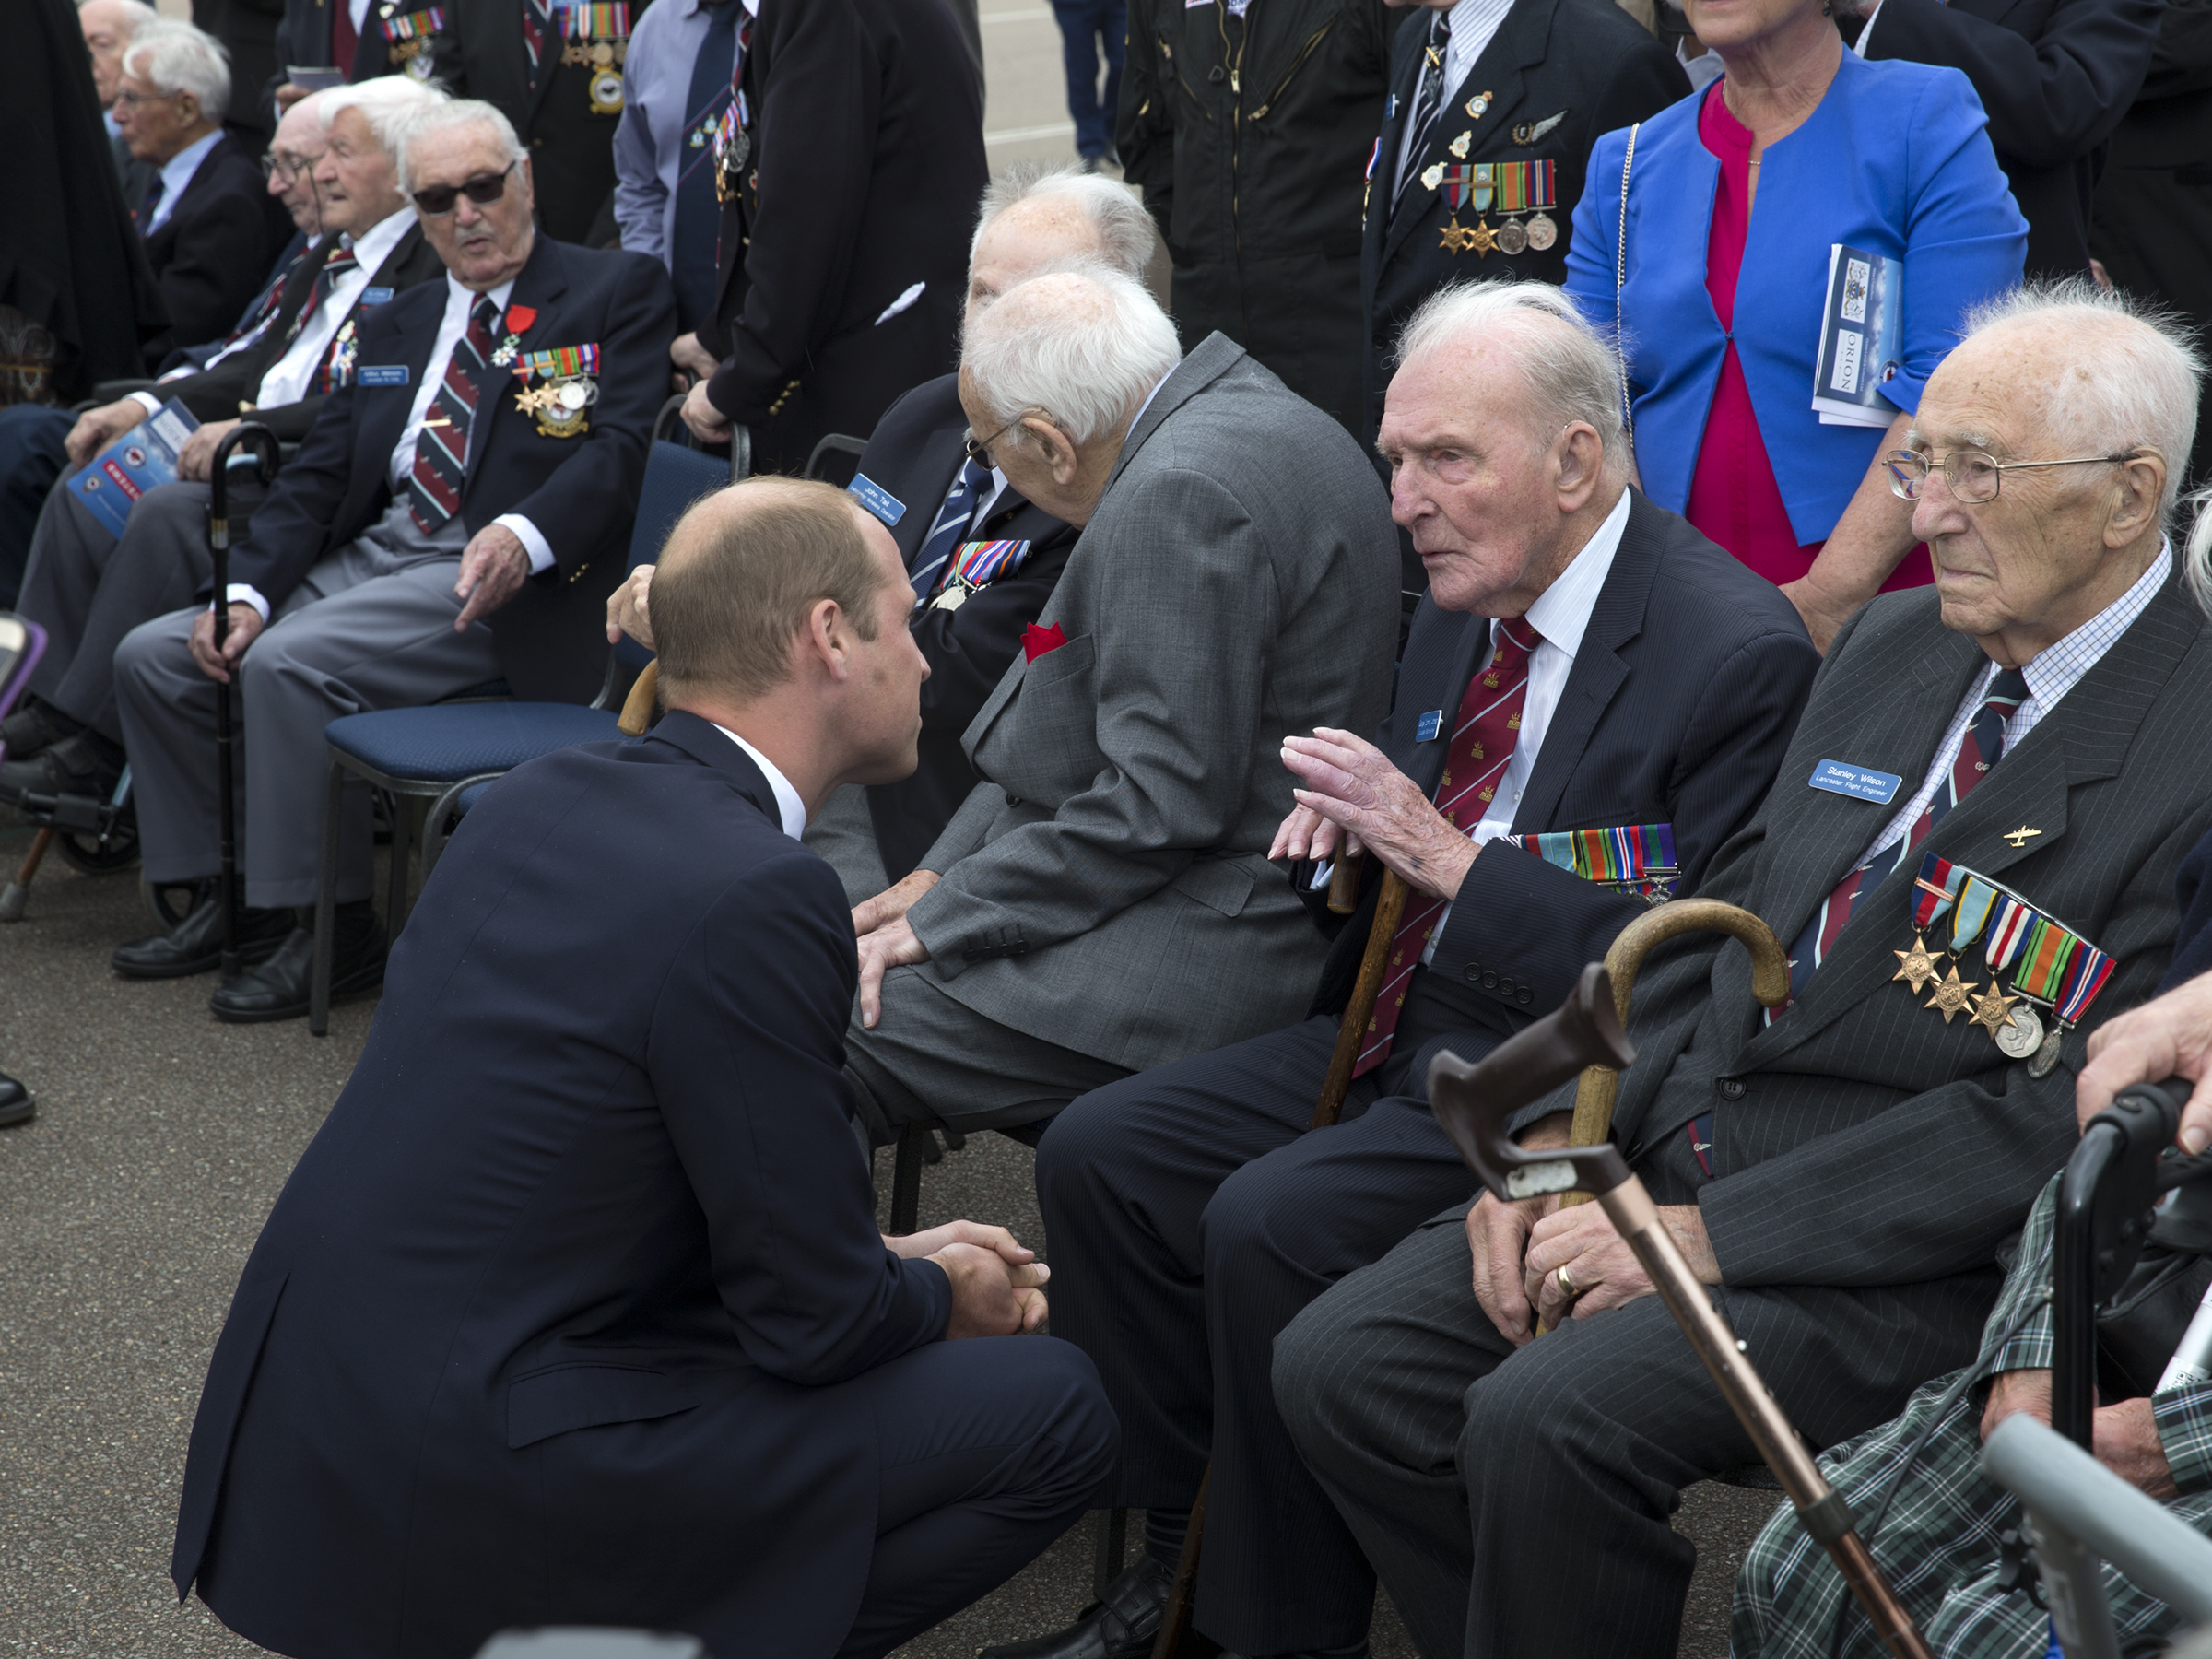 Prince William crouches to speak with Johnny and other Veterans.